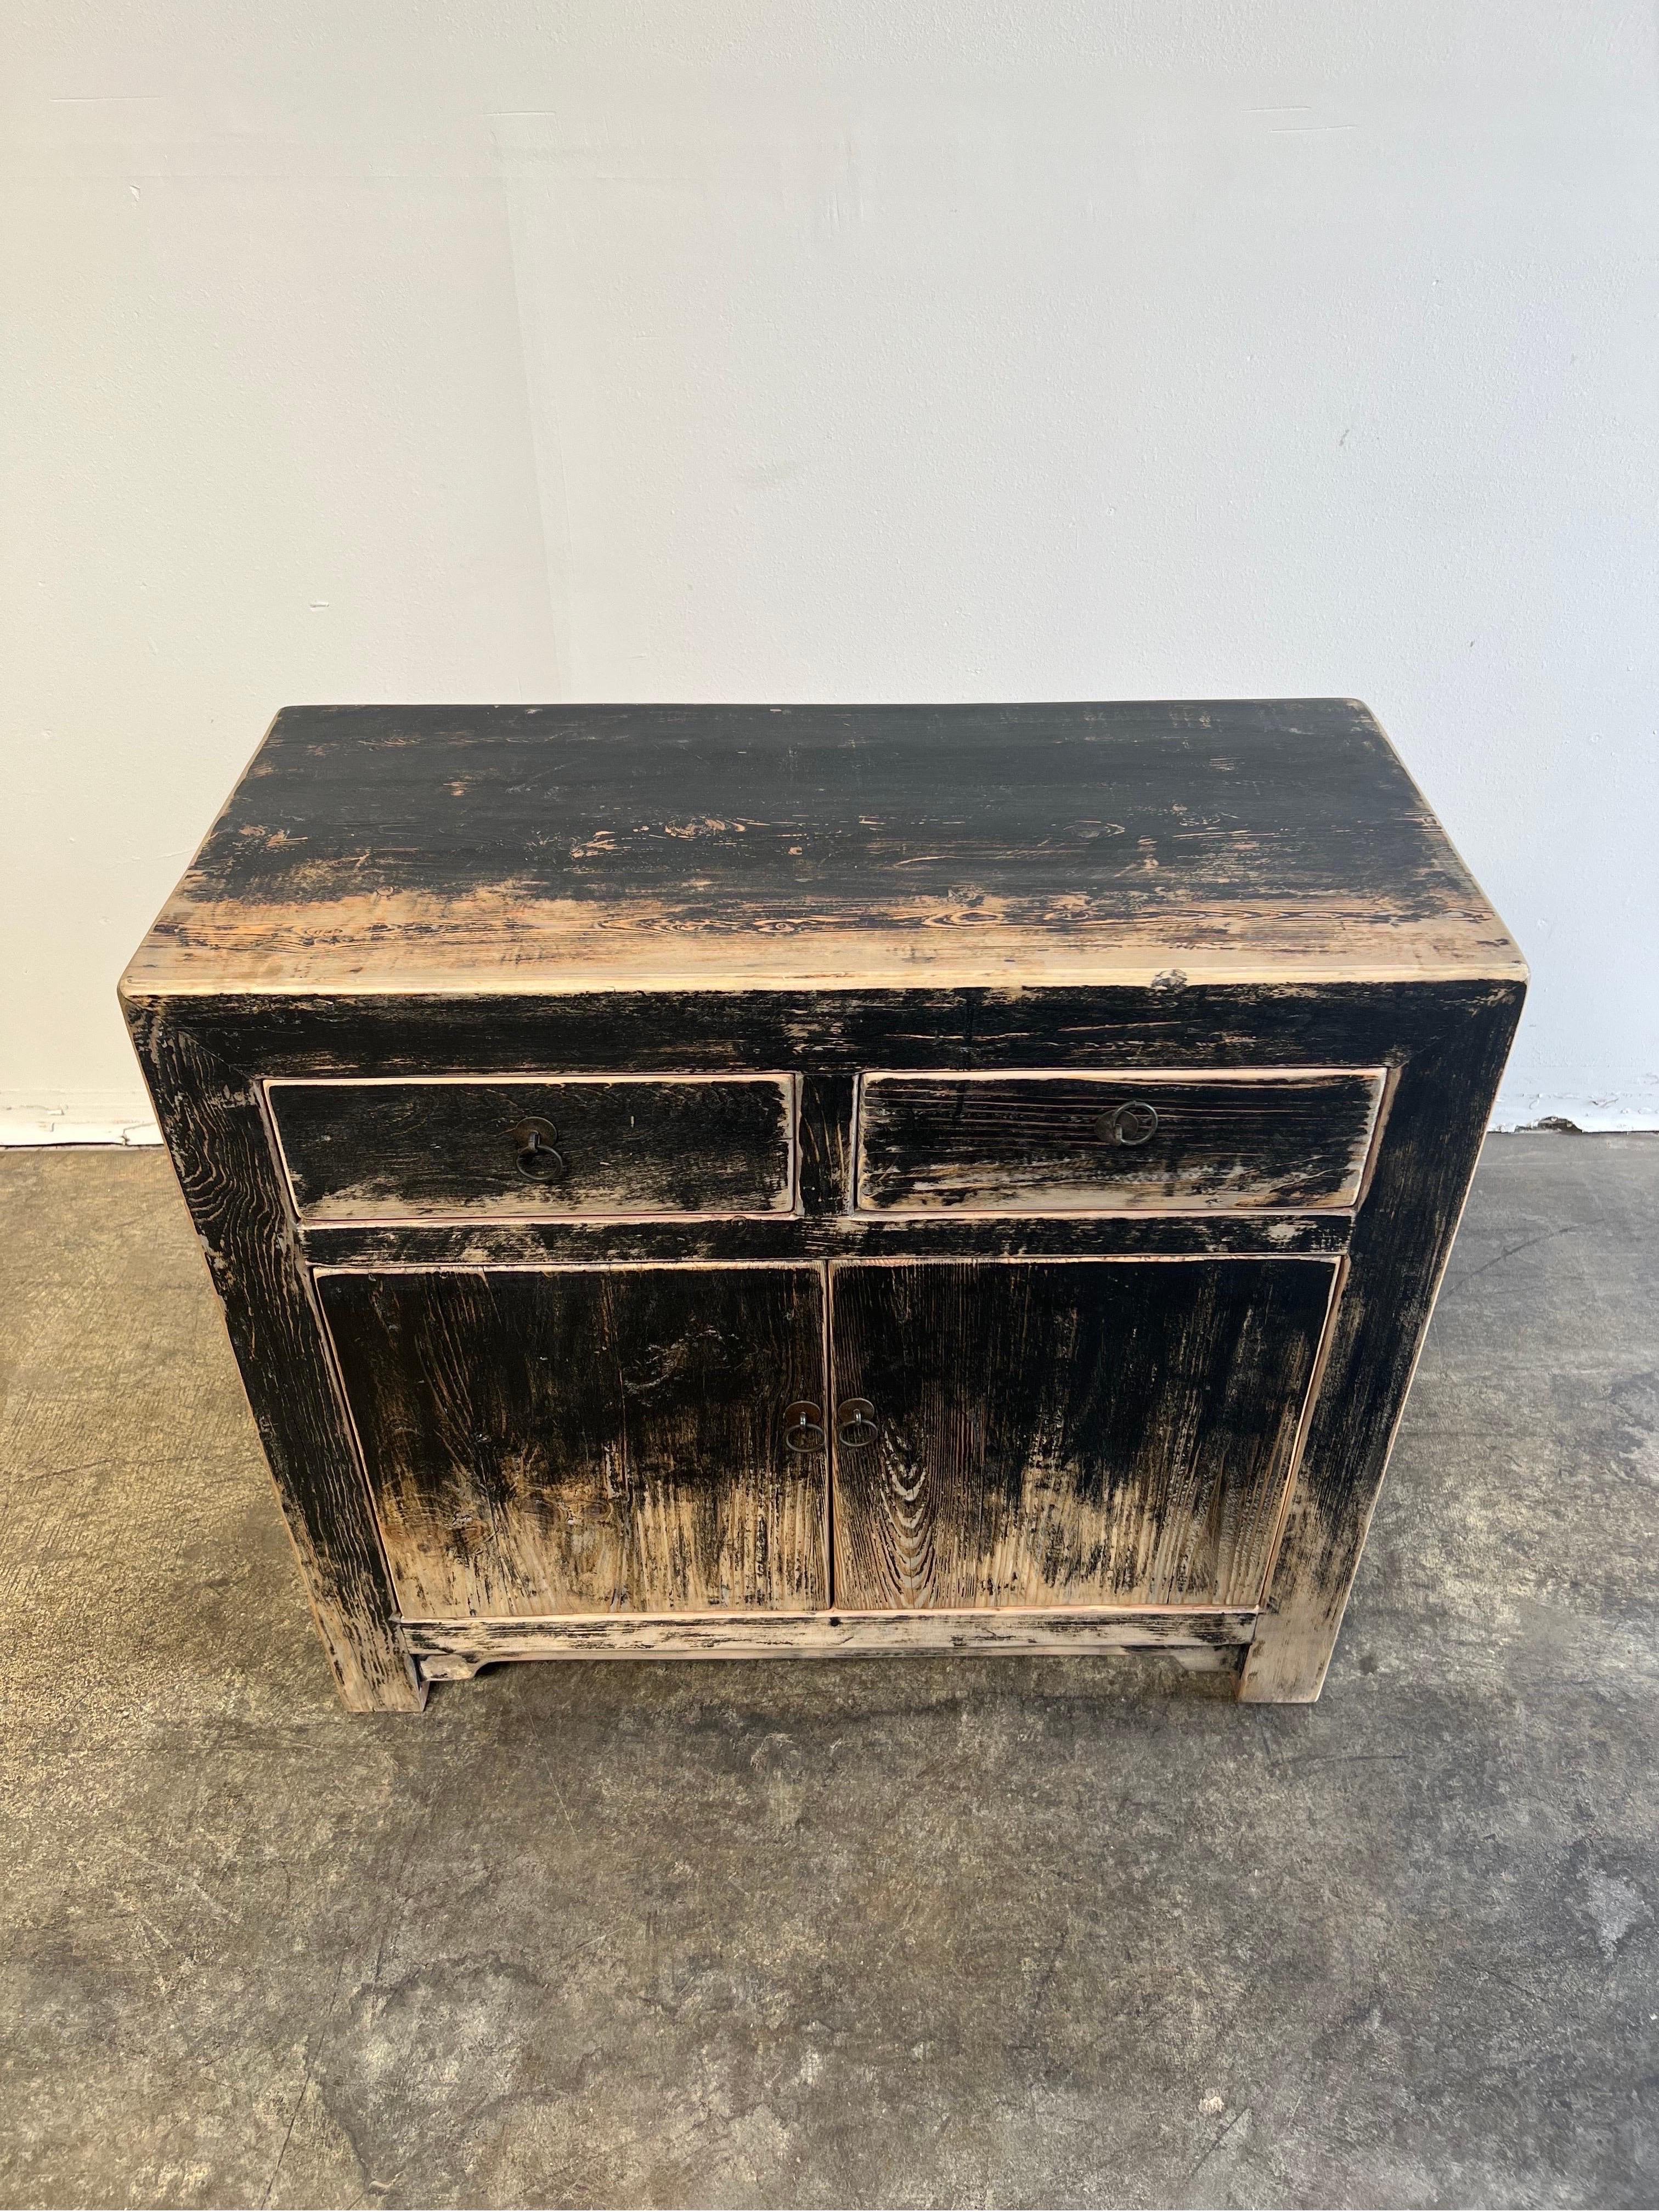 Vintage reclaimed elm wood 2 door with 2 drawers black distressed painted console. Perfect for an entry, use as a bar, in a dining room, or as a tv console. Doors open up with ease
Size: 33.5h x 38w x 17.75D.